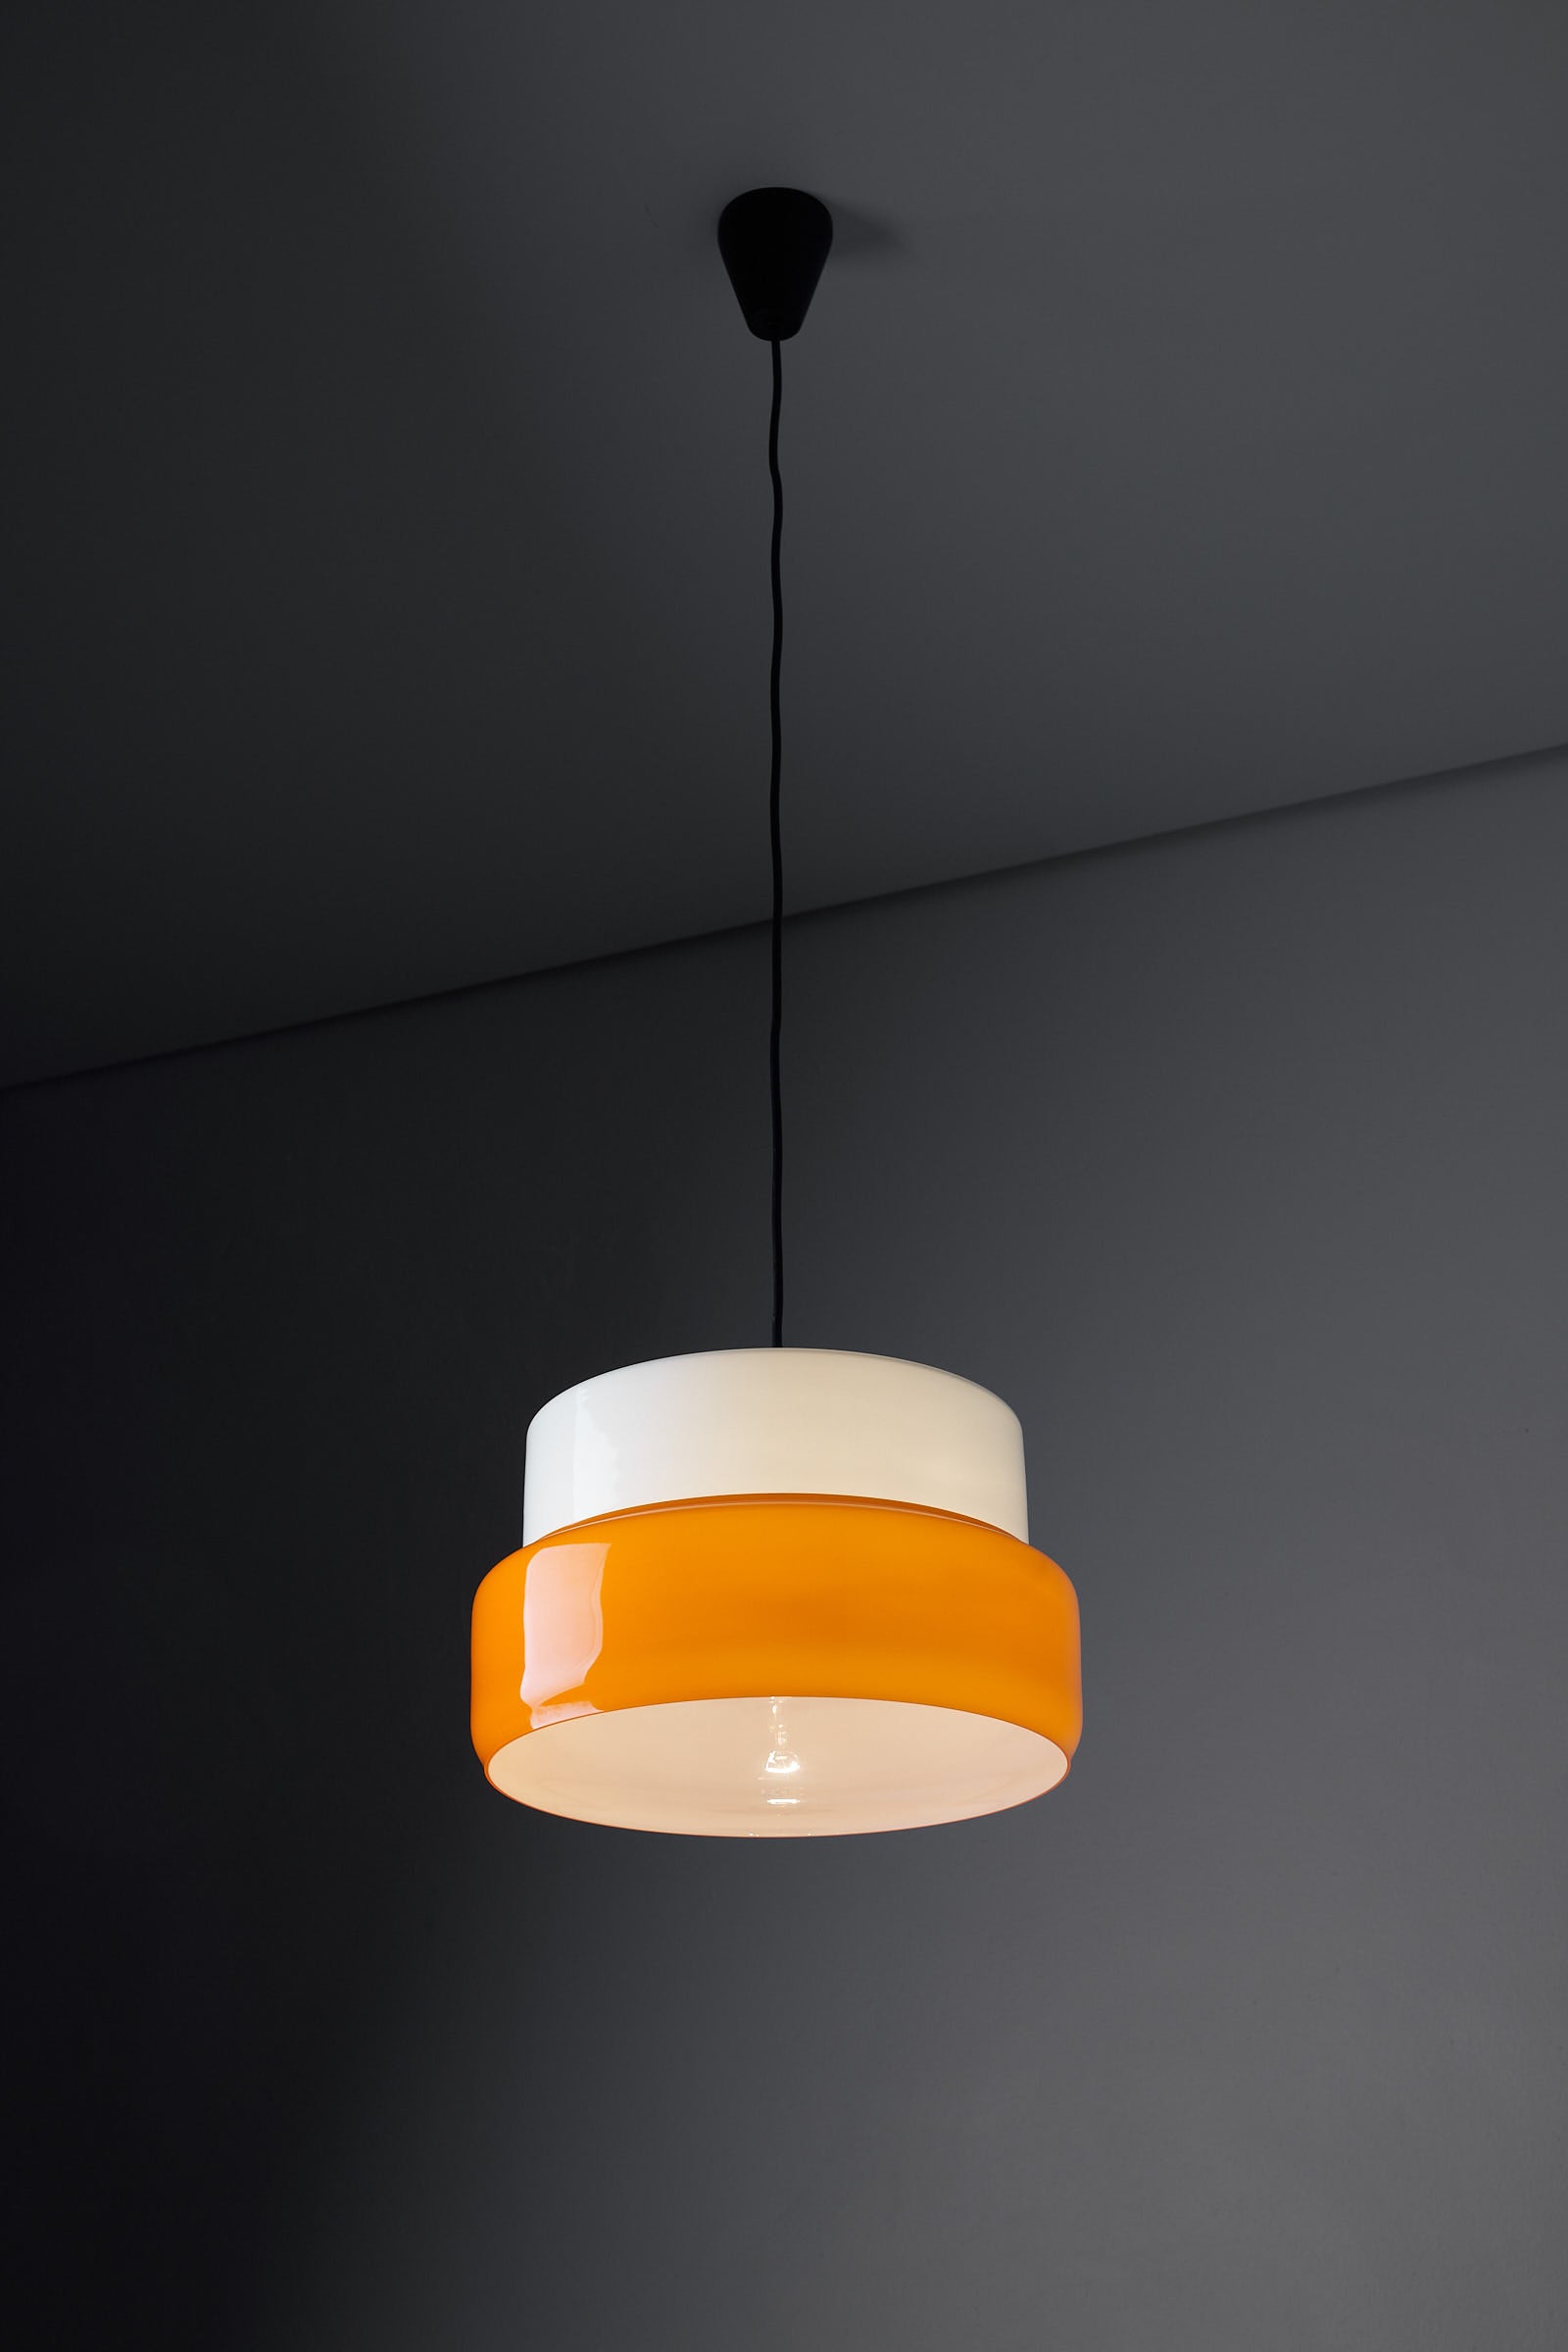 Pendant Lamp by the brand Vistosi from Italy, Lamp in Orange in Opal Murano glass.